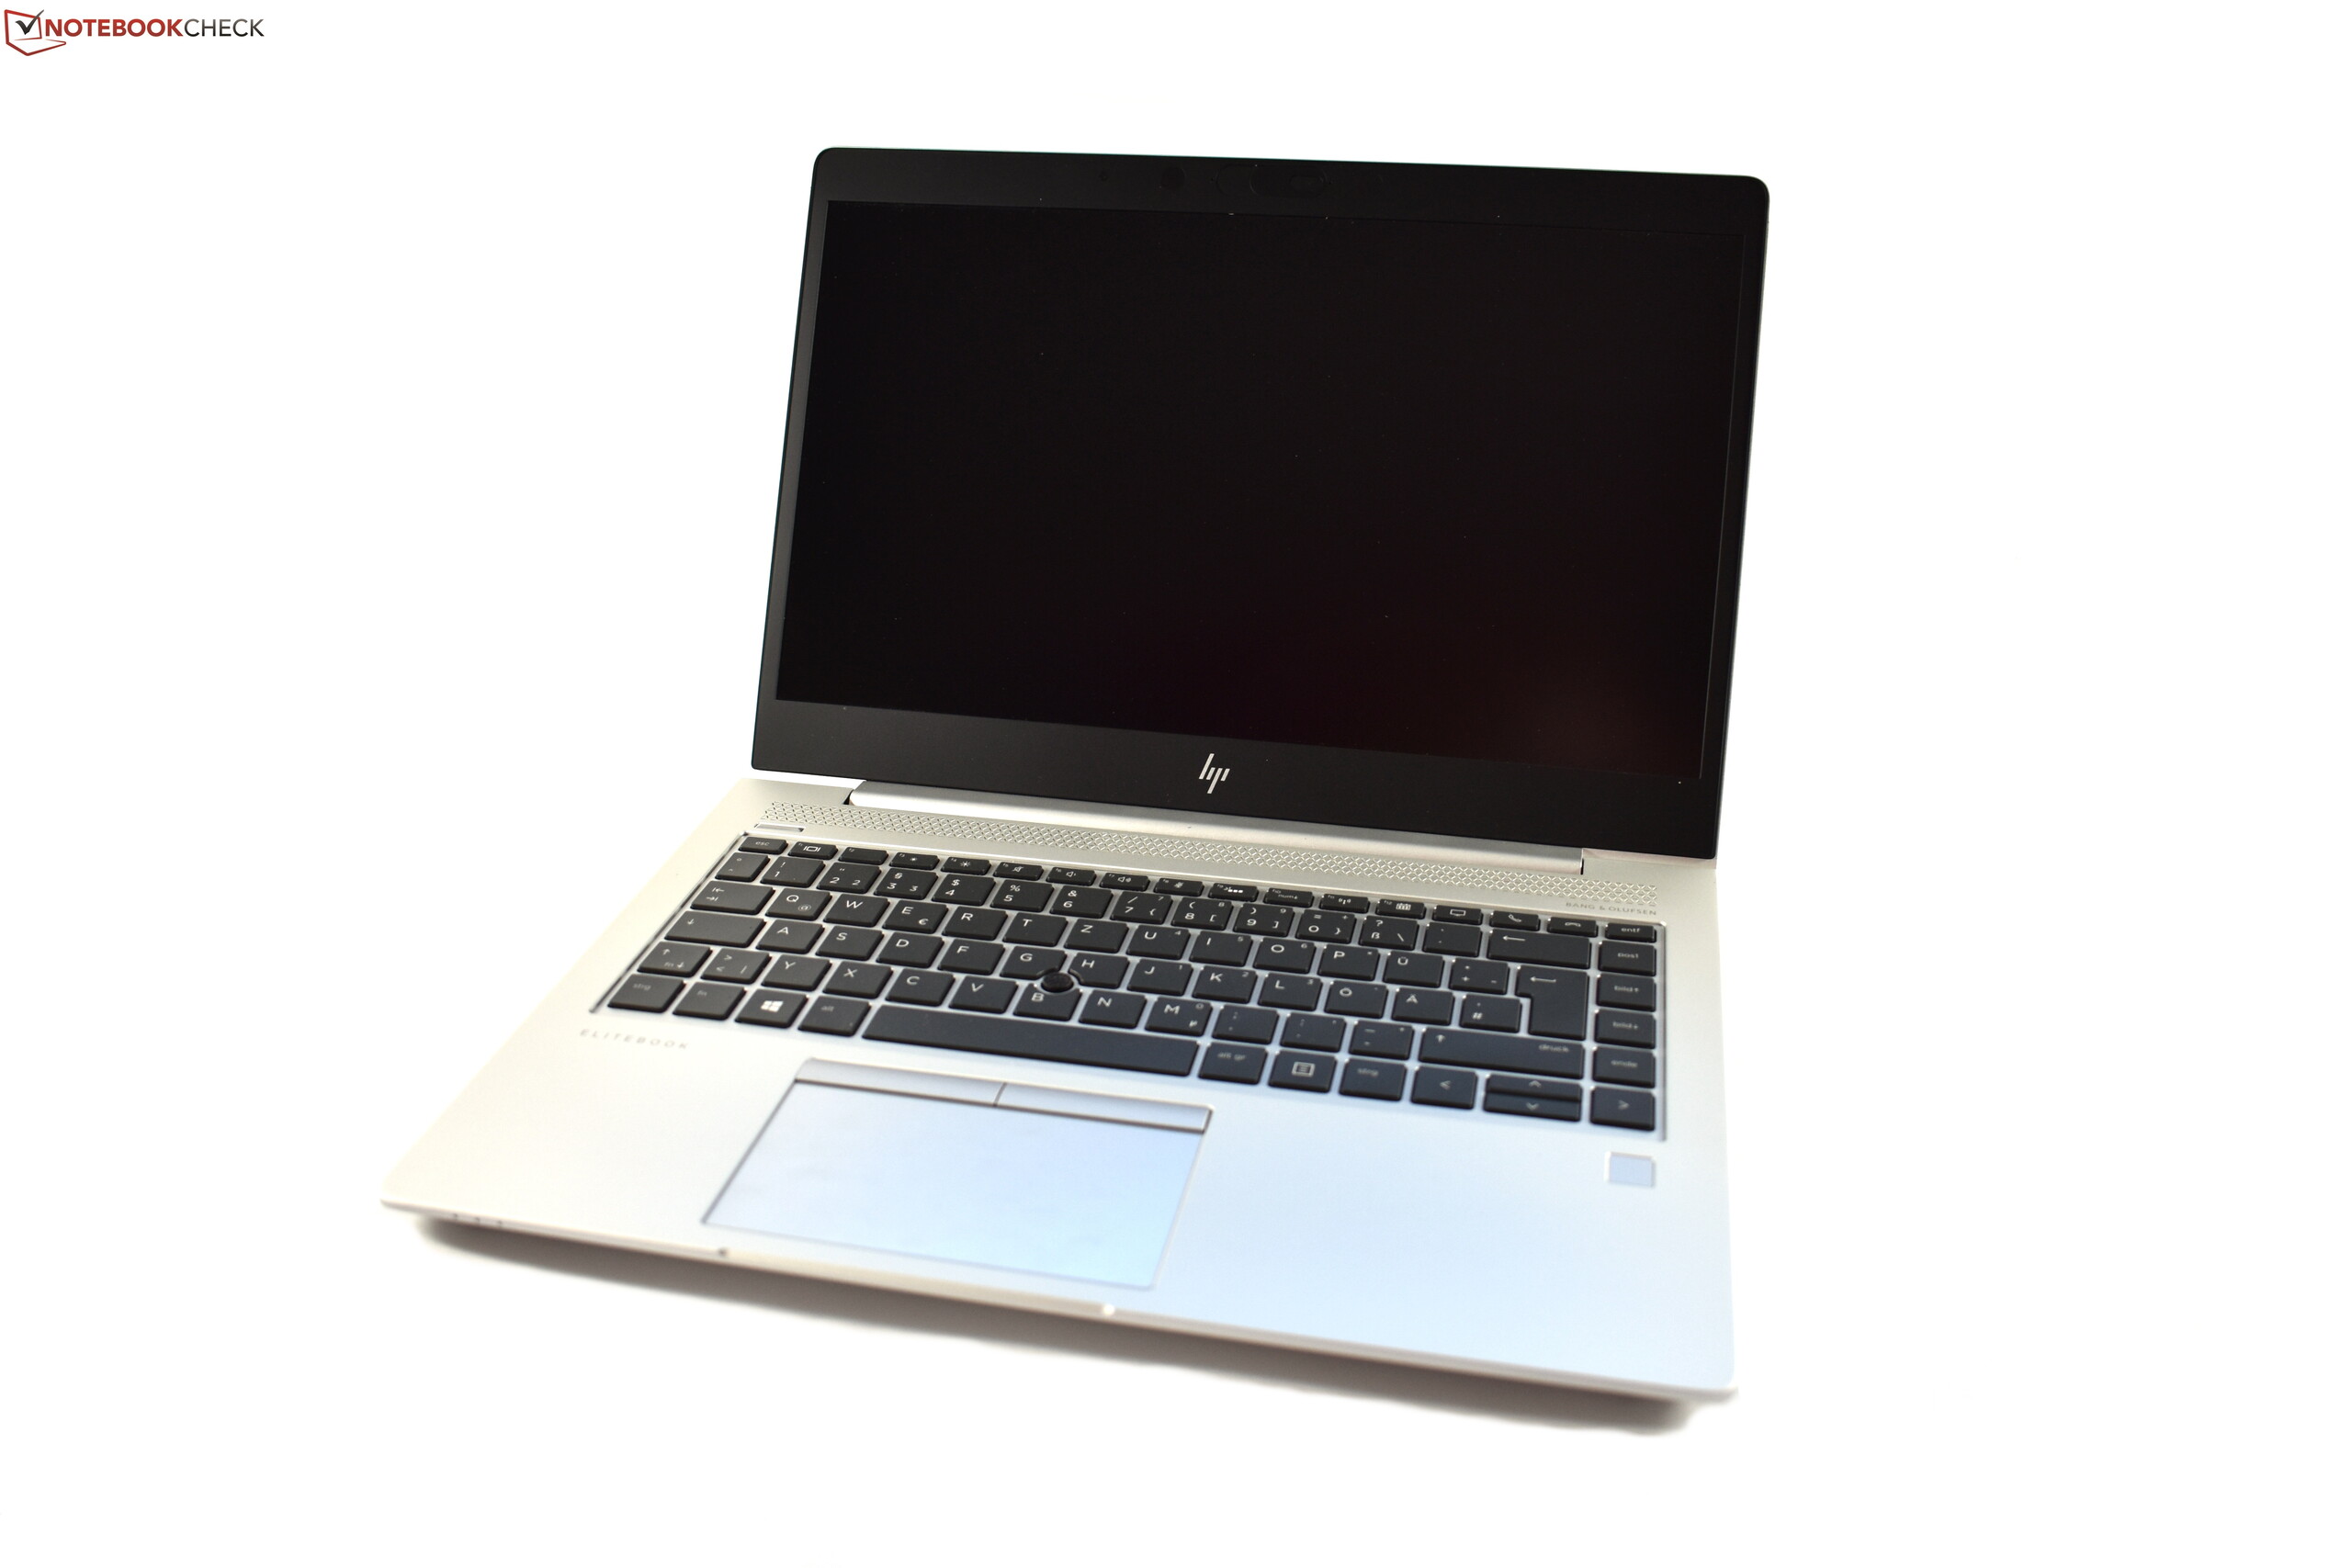 HP EliteBook 840 G5, First Take: A solid business-class laptop